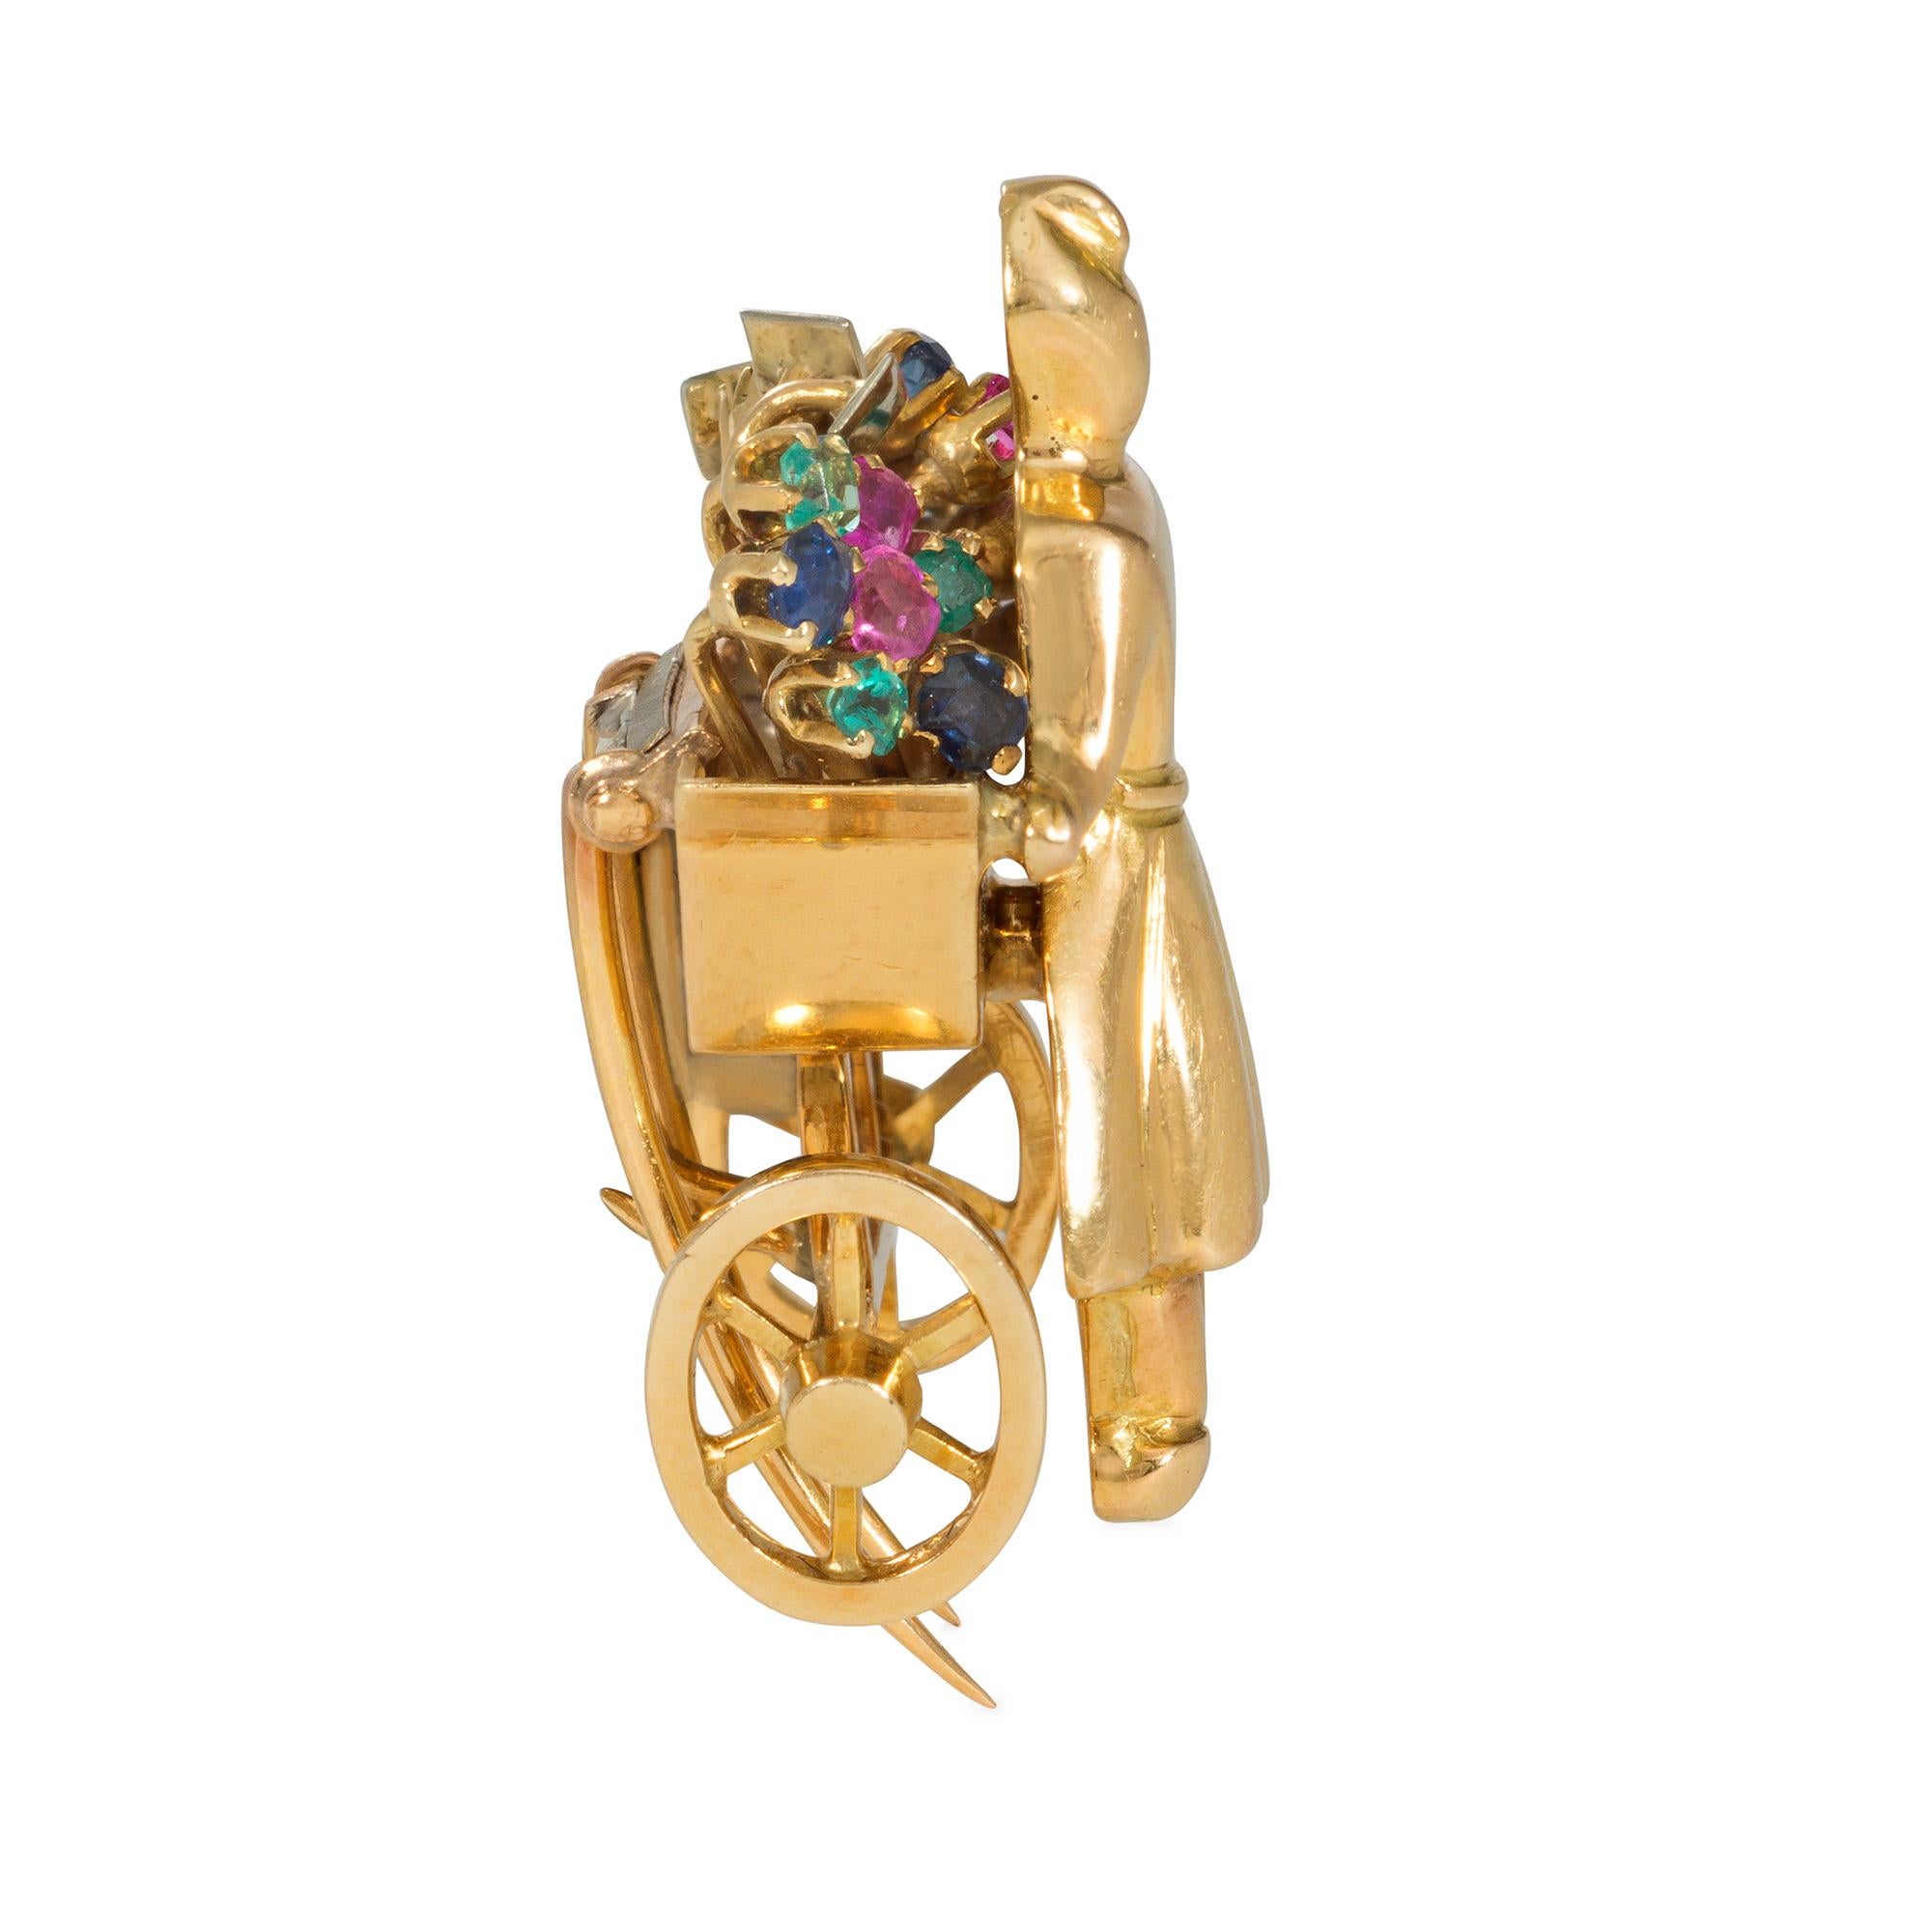 A whimsical Retro gold and multi-gemstone clip brooch in the form of a figure pushing a flower cart, set with sapphires, emeralds, and rubies, in 18k with double pin stem fitting.  Mellerio Dits Meller. #49630. France.

Established in 1613, Mellerio